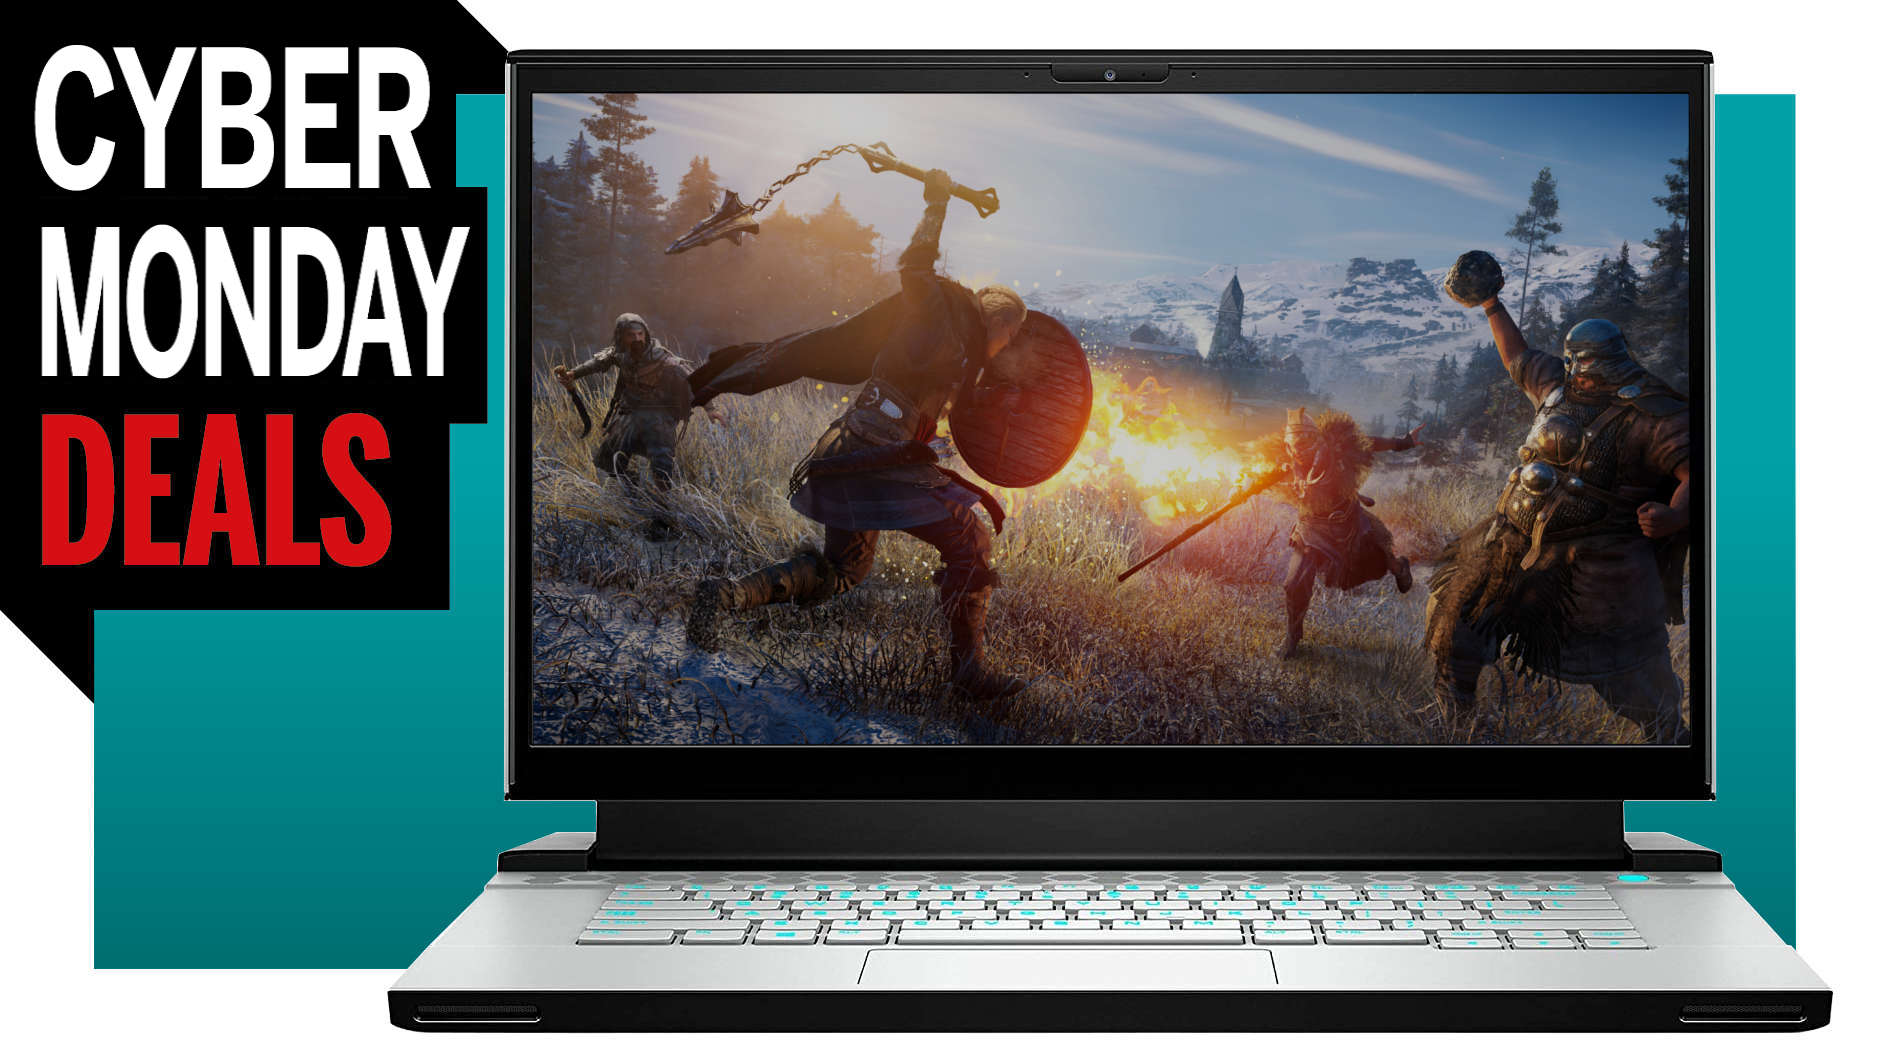 Cyber Monday gaming laptop deals 2022: notebooks are the hot ticket item this year